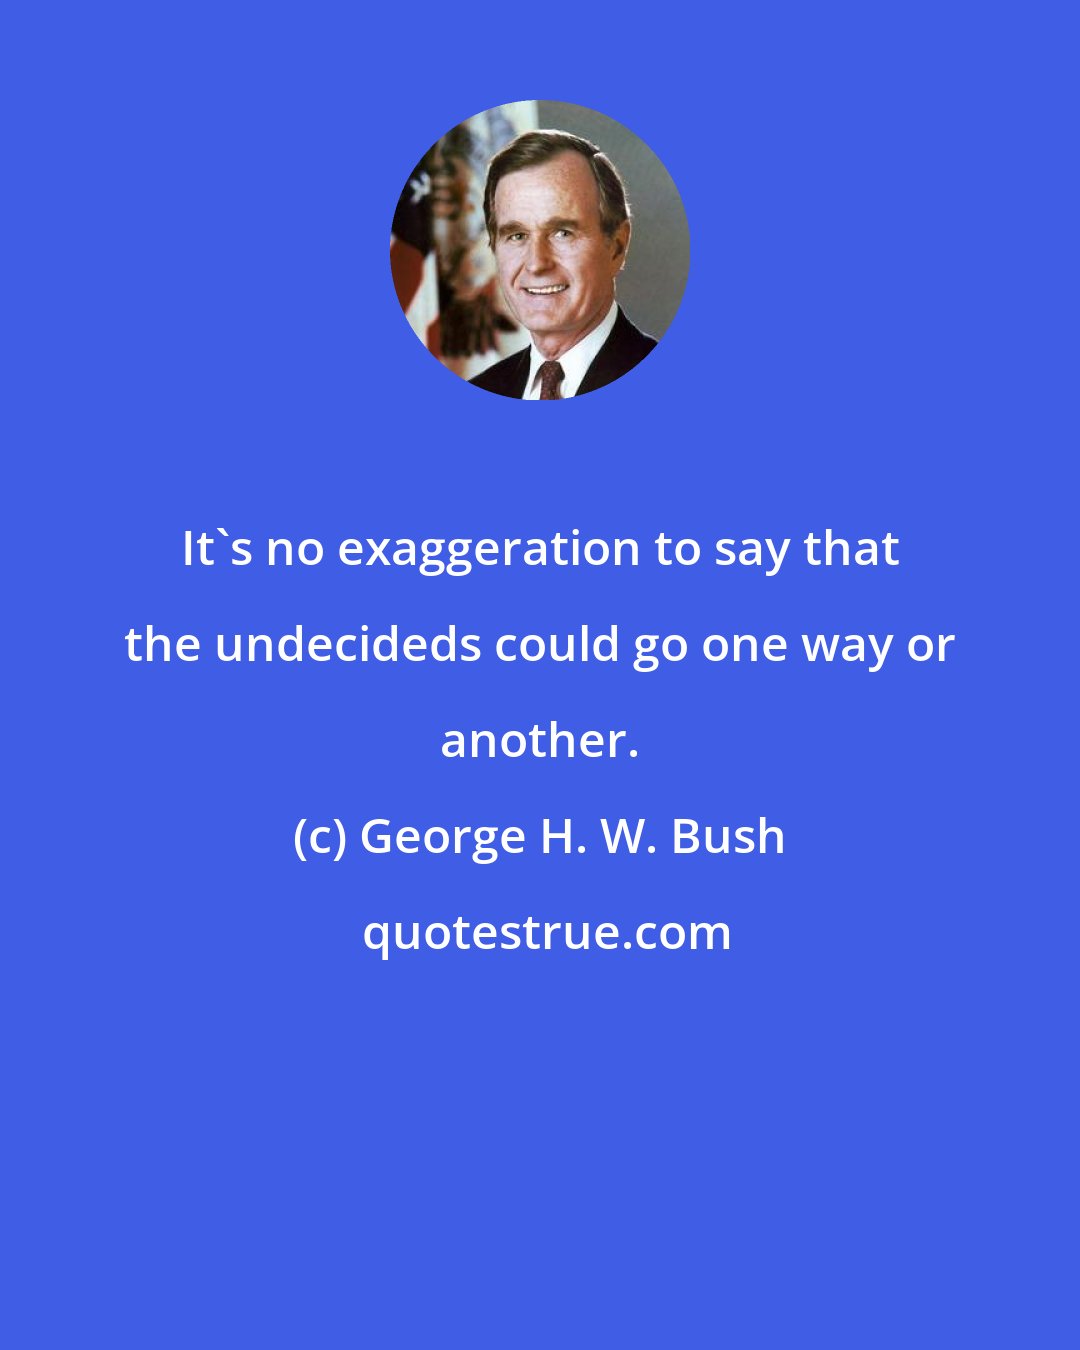 George H. W. Bush: It's no exaggeration to say that the undecideds could go one way or another.